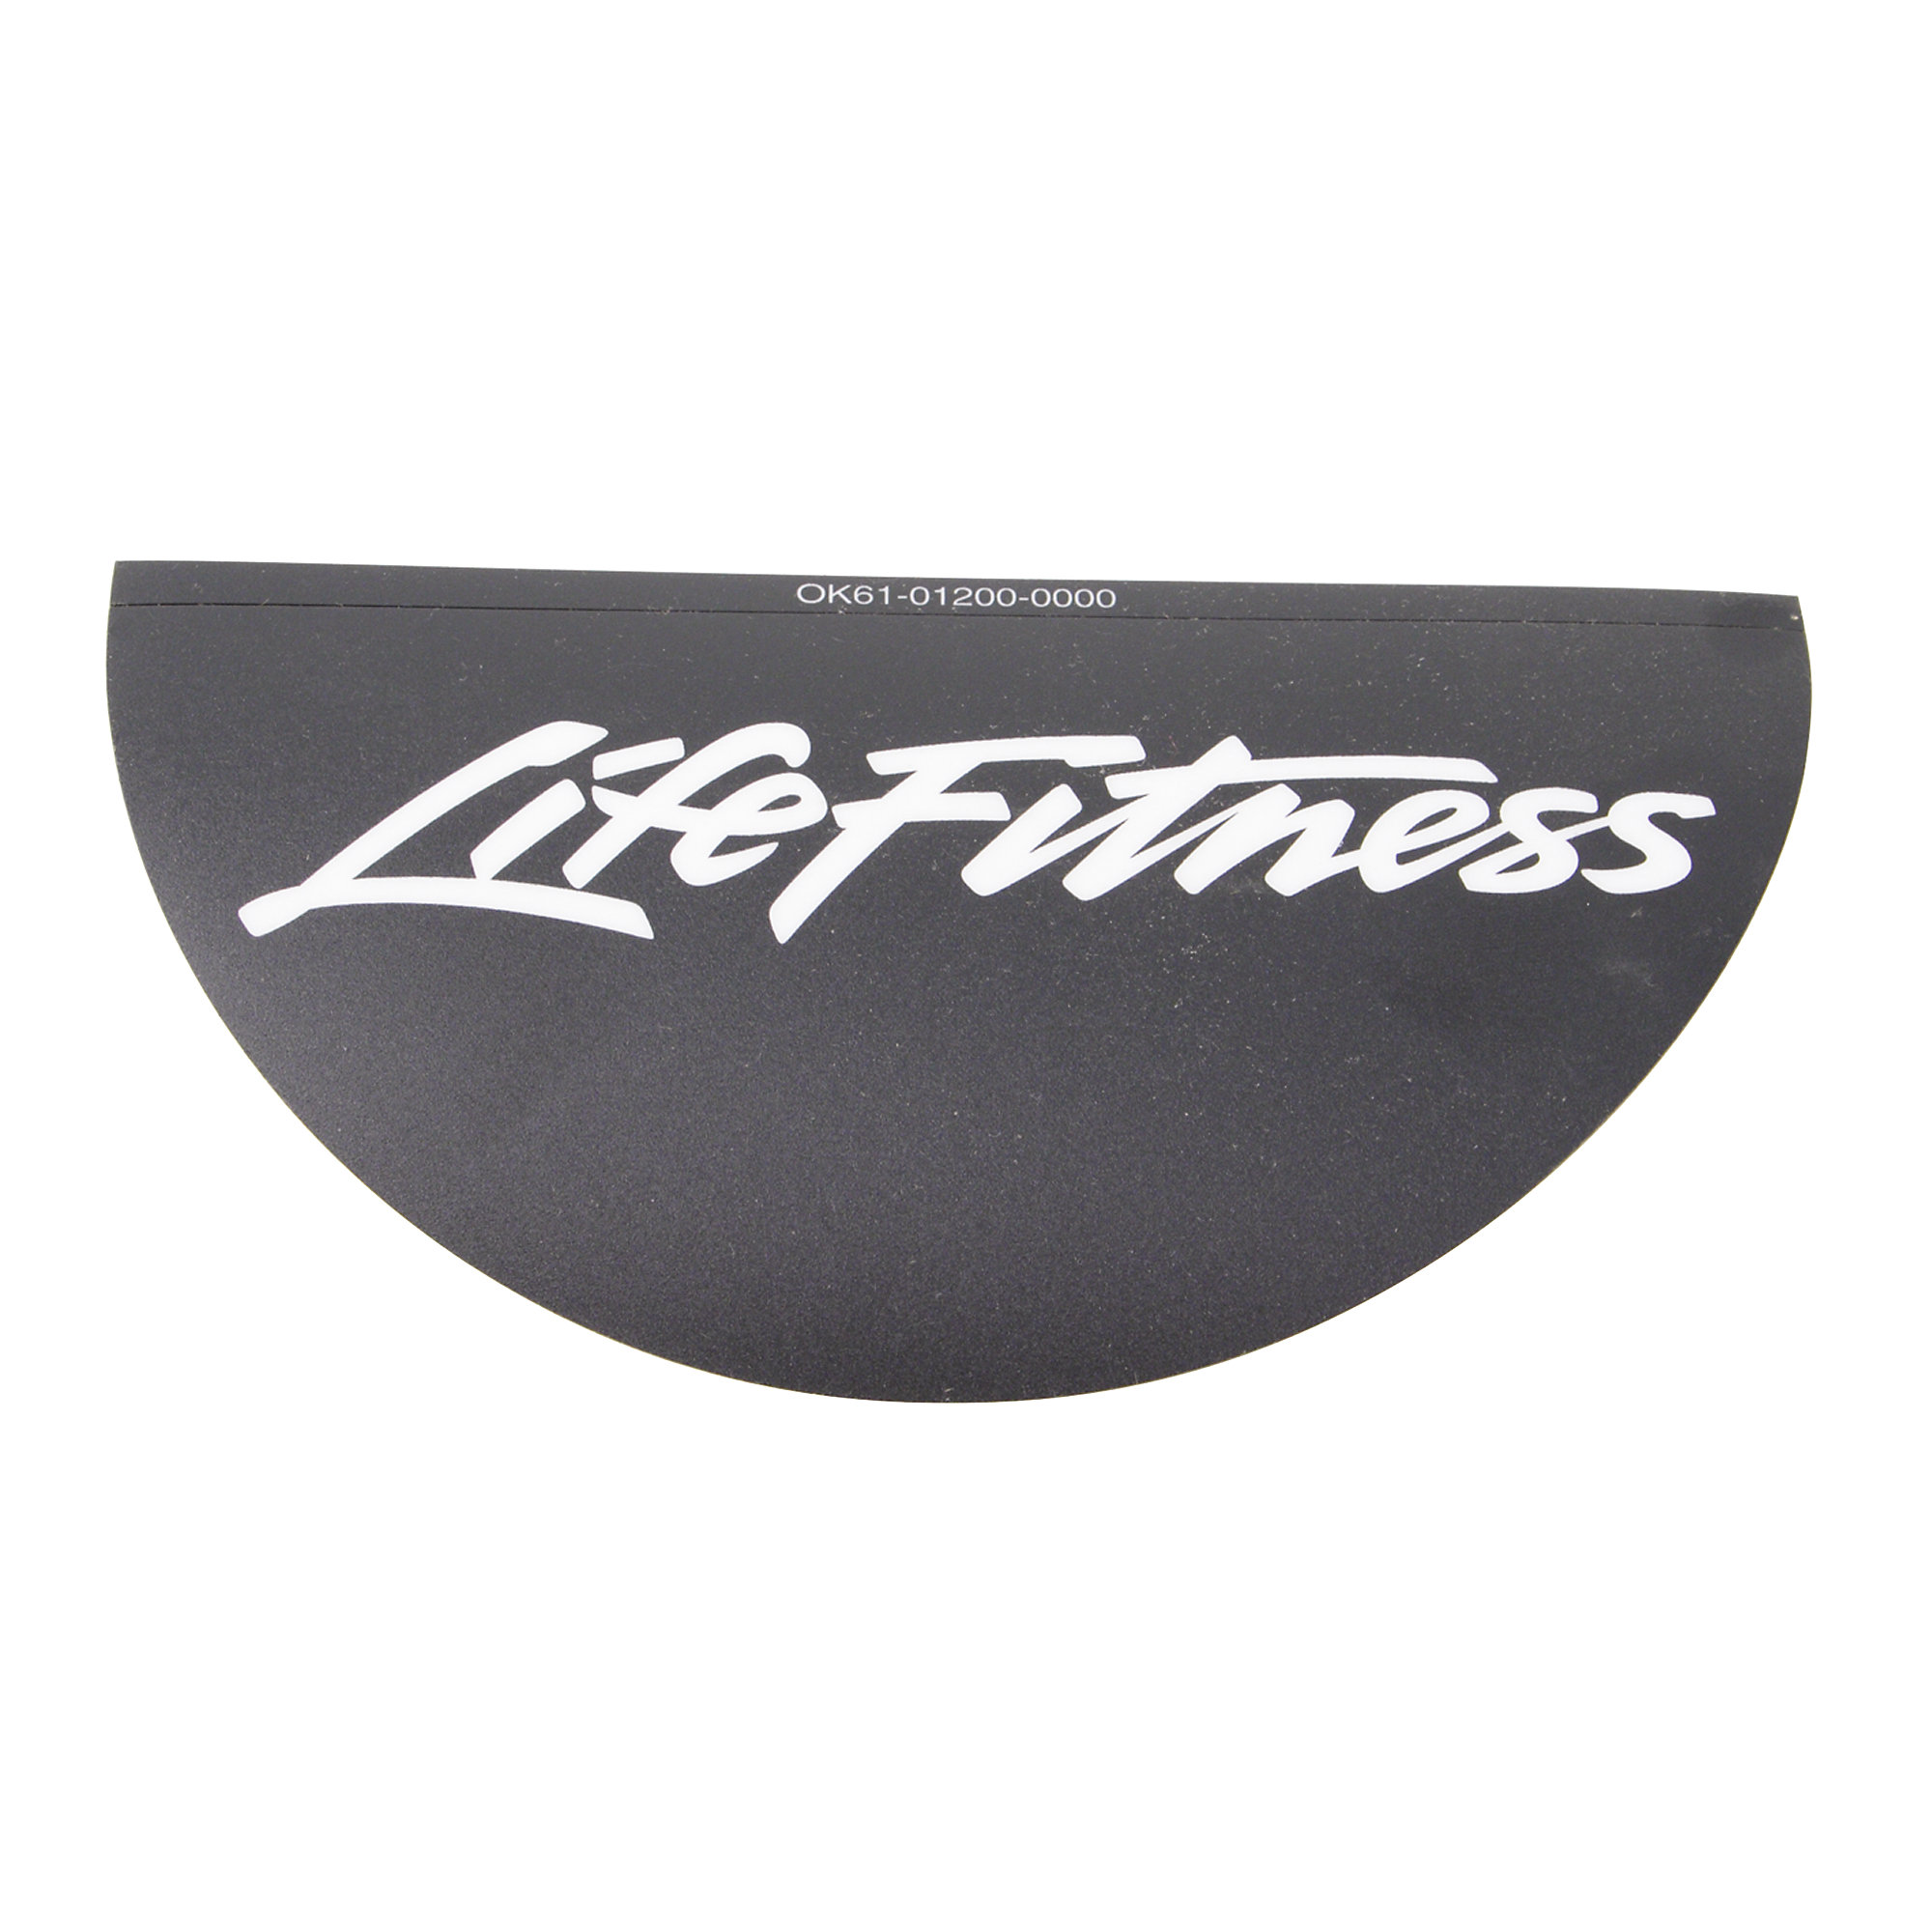 Decal Console Post Ct55/91/95 Cross Trainer Lifefitness